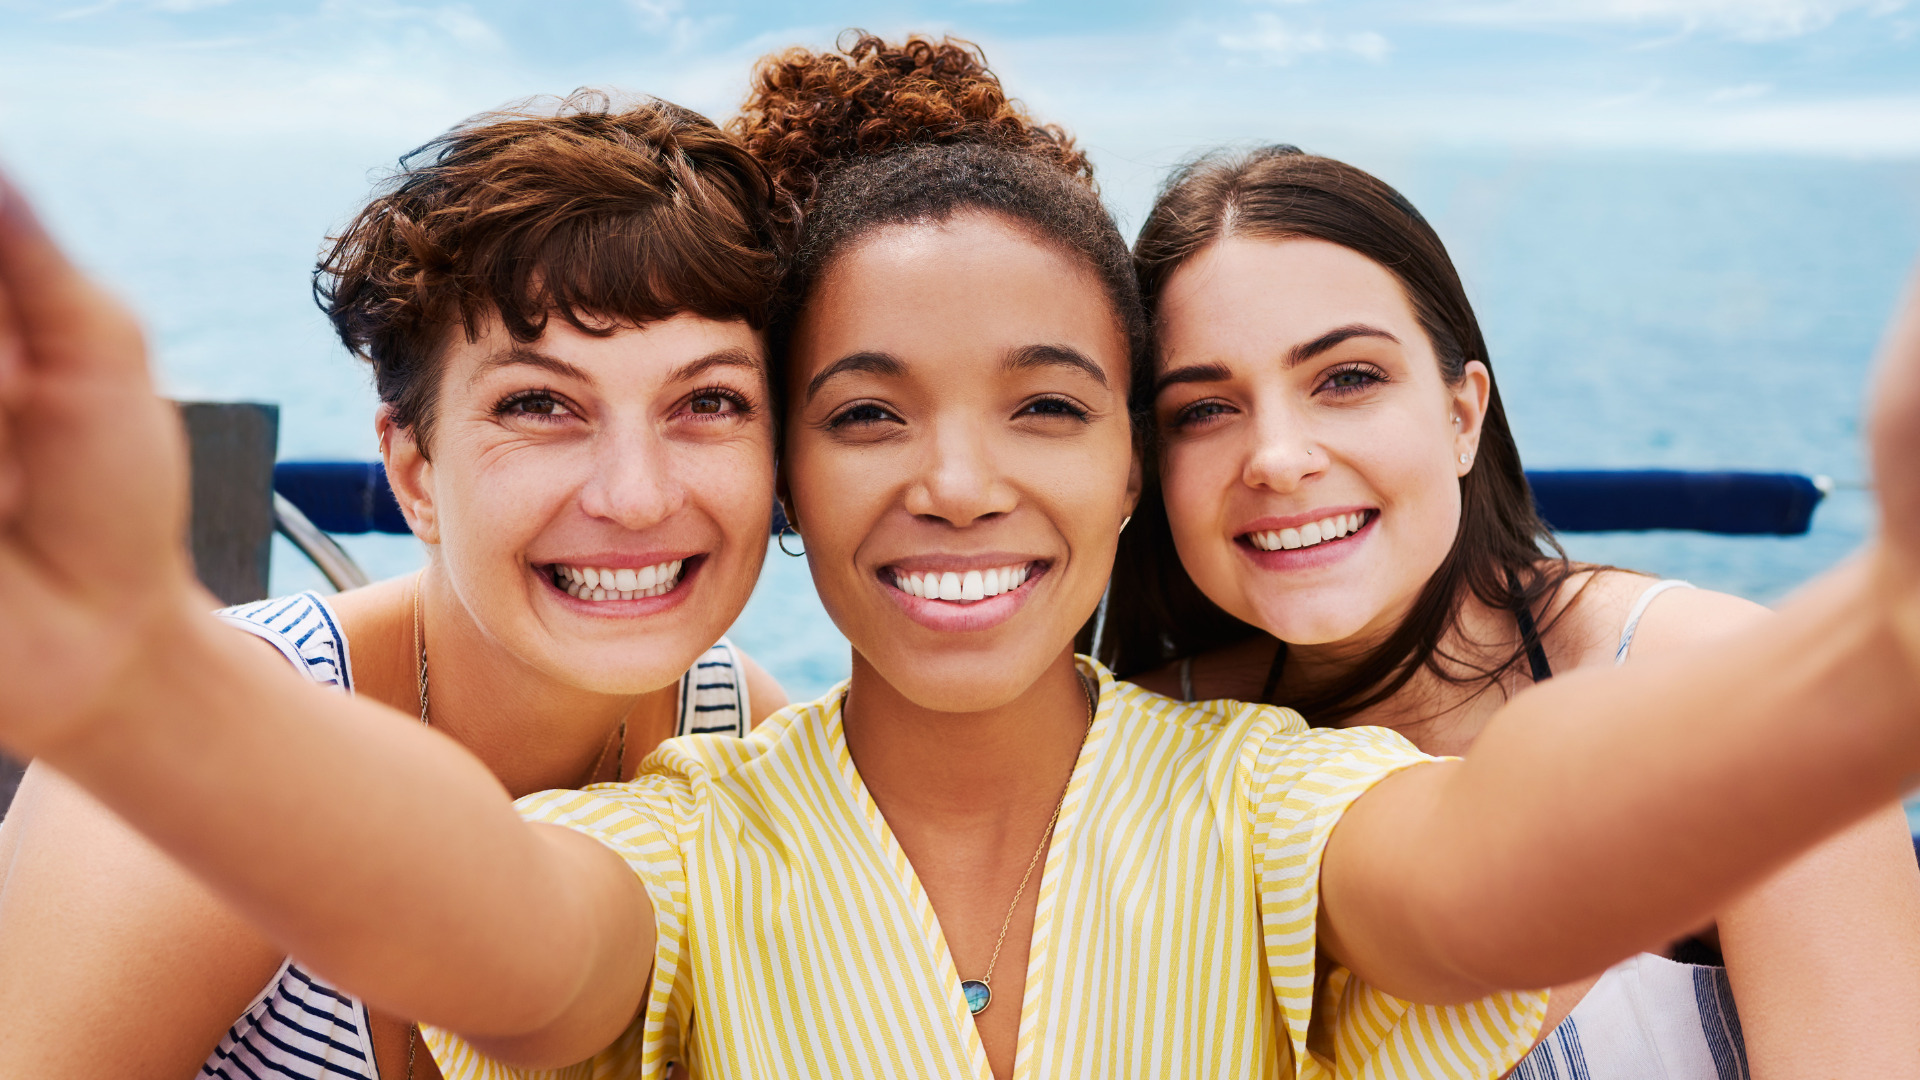 Three women smiling and posing for a selfie on a boat, capturing a joyful moment together.